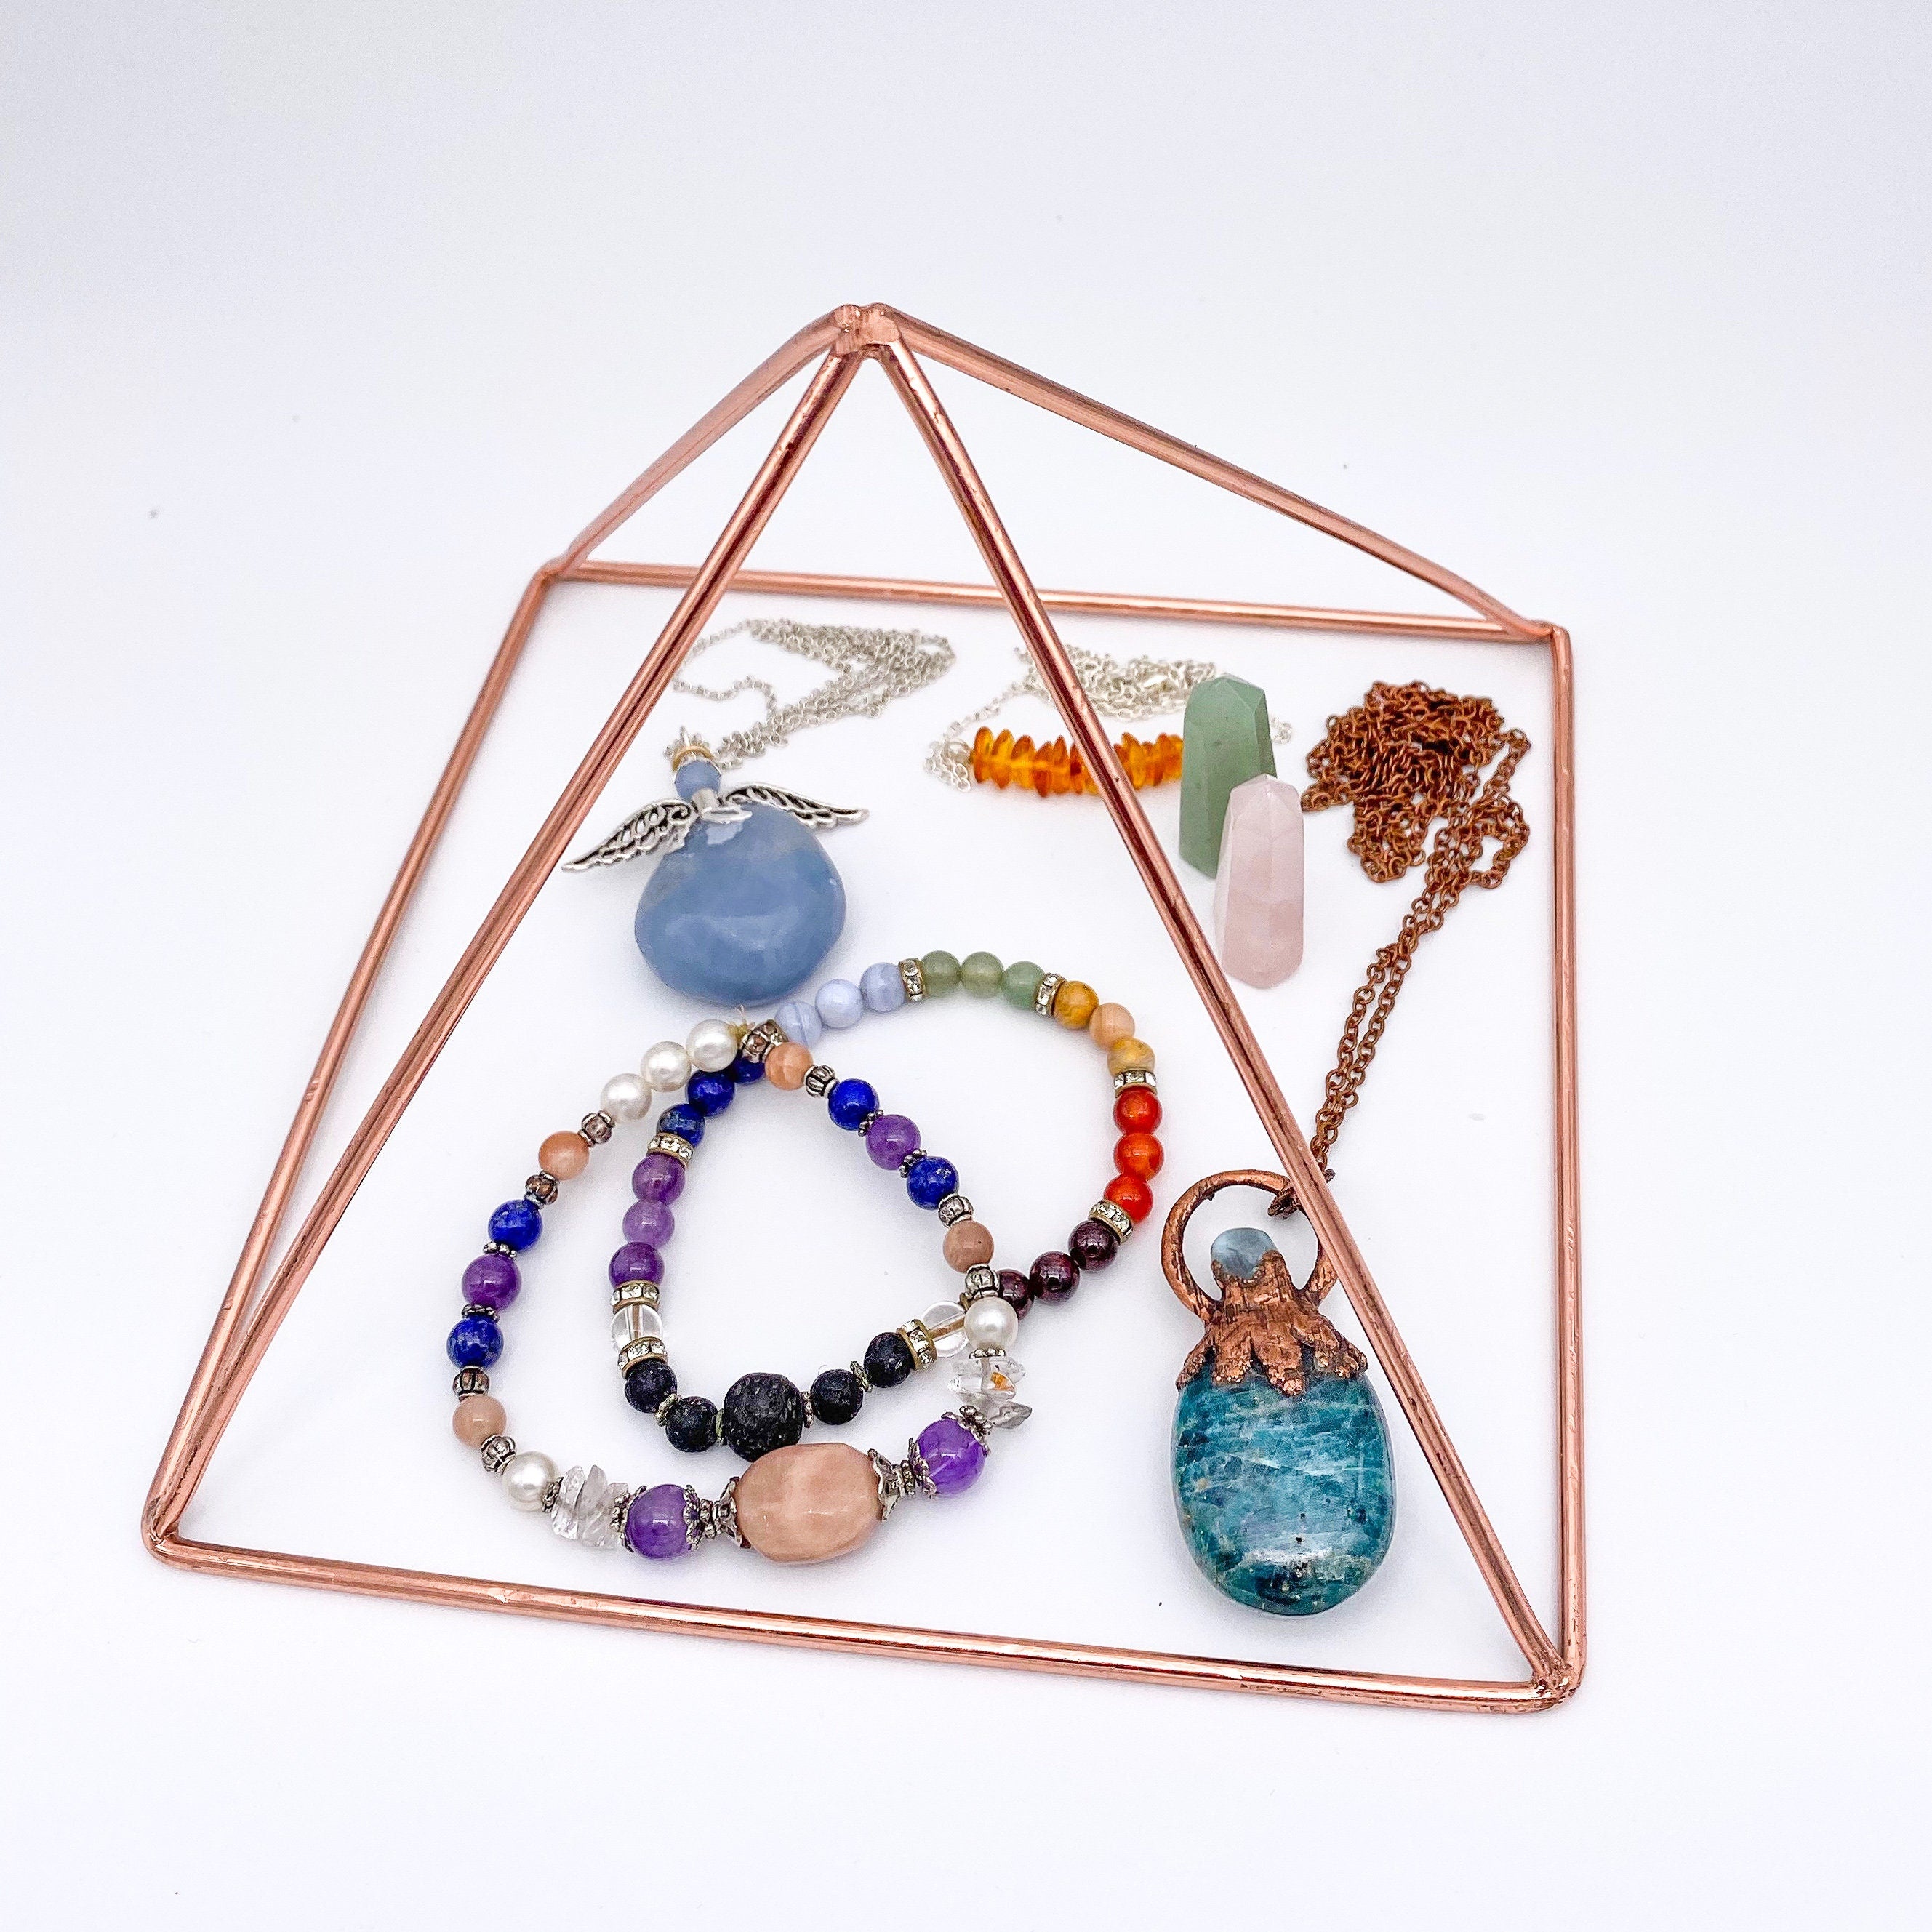 How to cleanse crystals in a copper pyramid – Crystal Agate